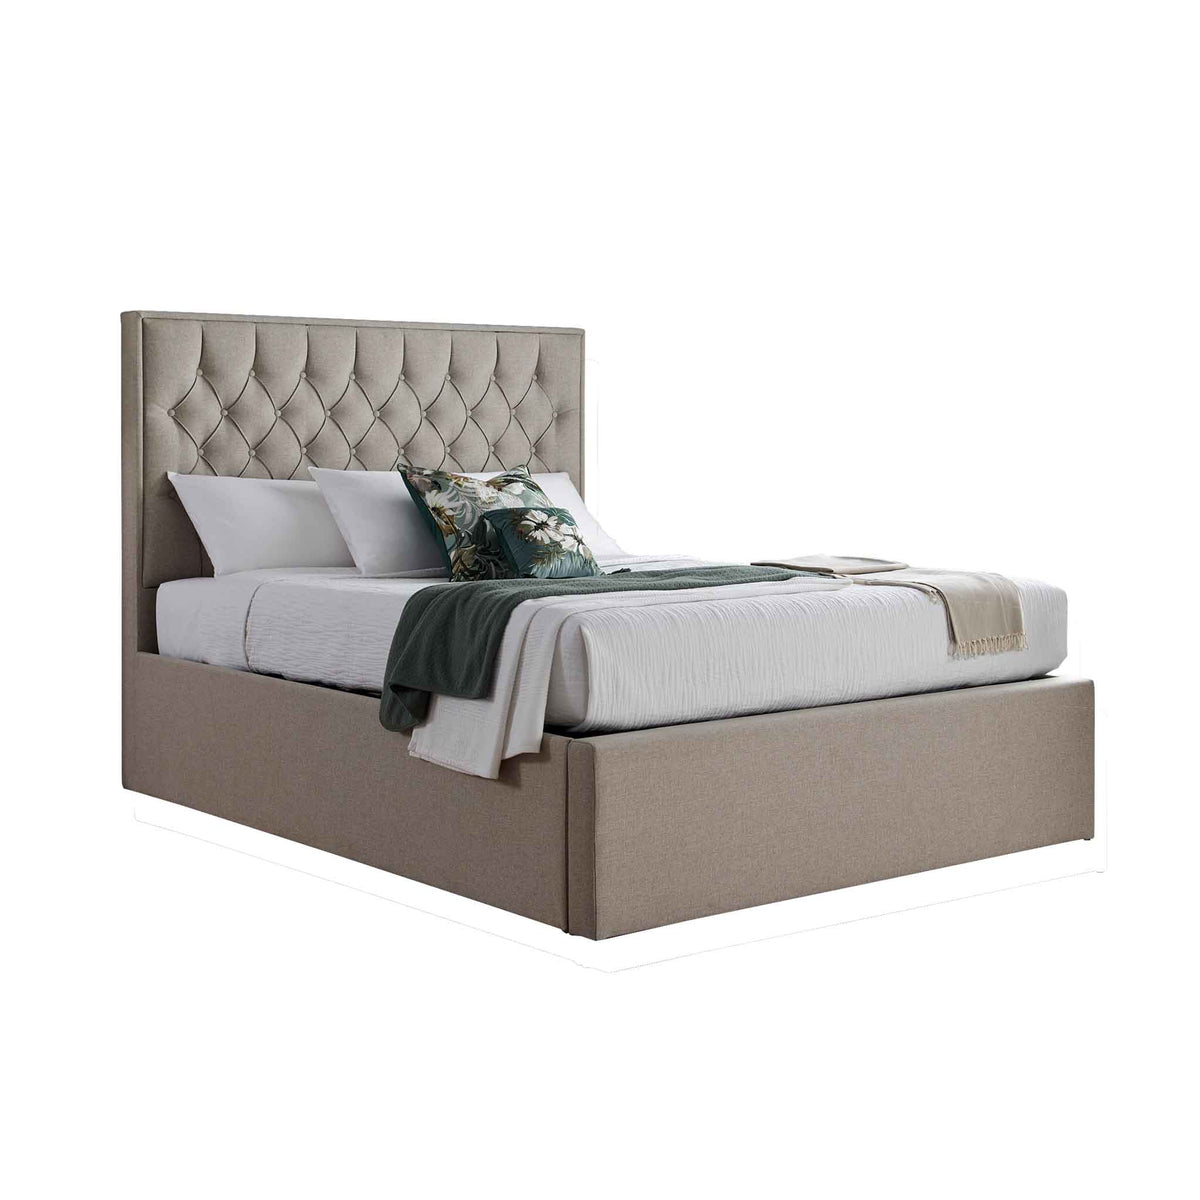 Sutton Oatmeal Upholstered Fabric Ottoman Storage Bed from Roseland Furniture